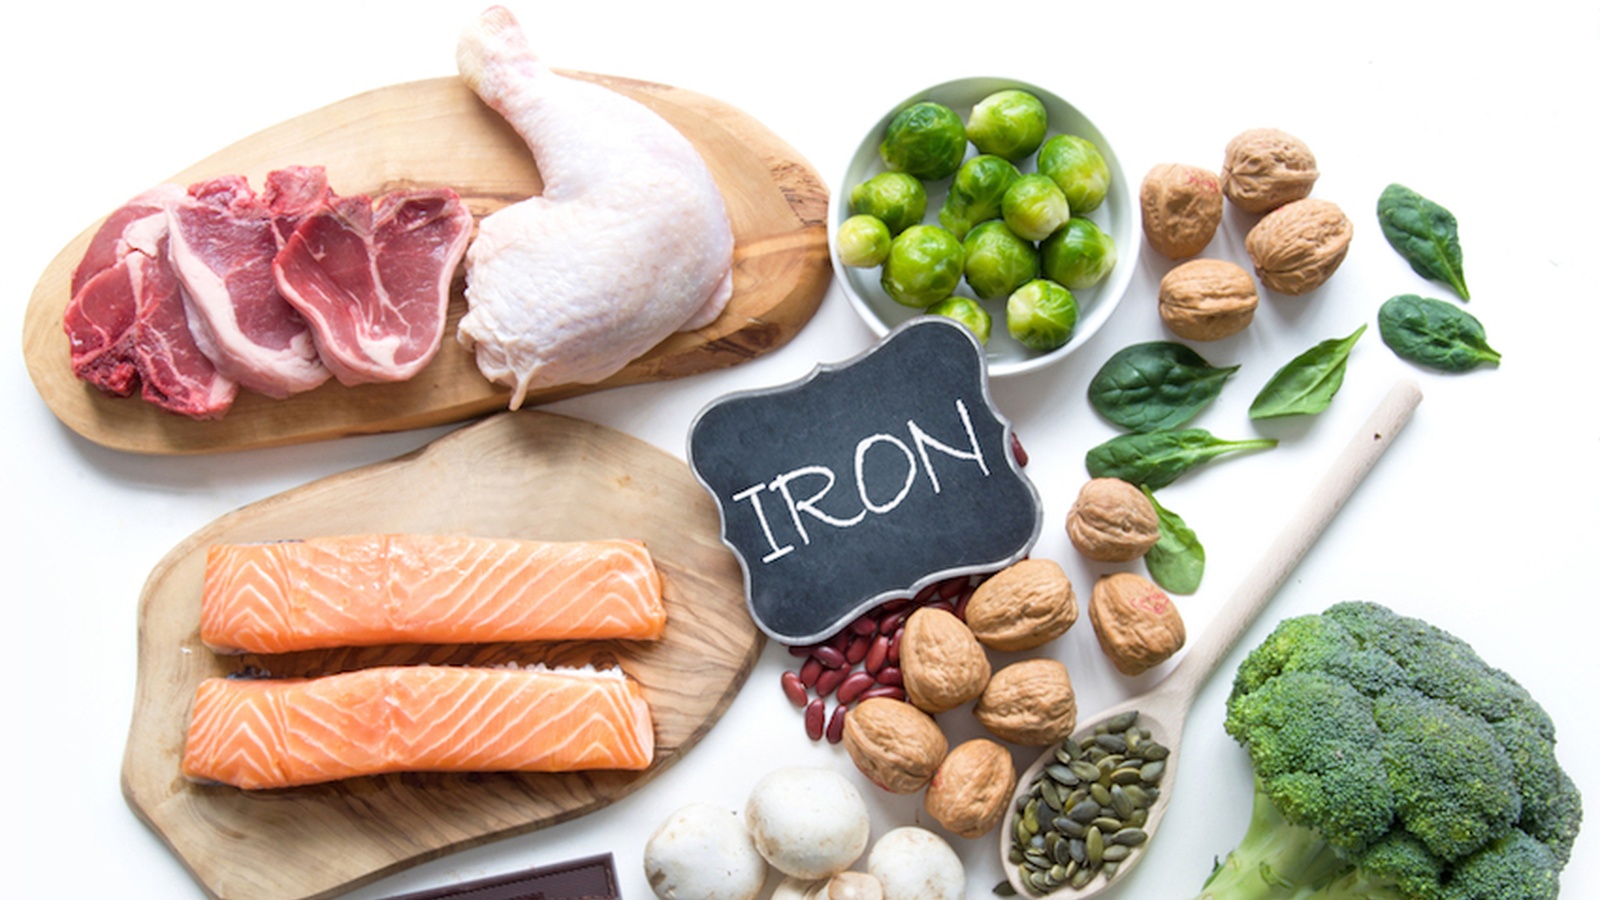 Going Plant Based: How Will I Meet My Iron Needs?